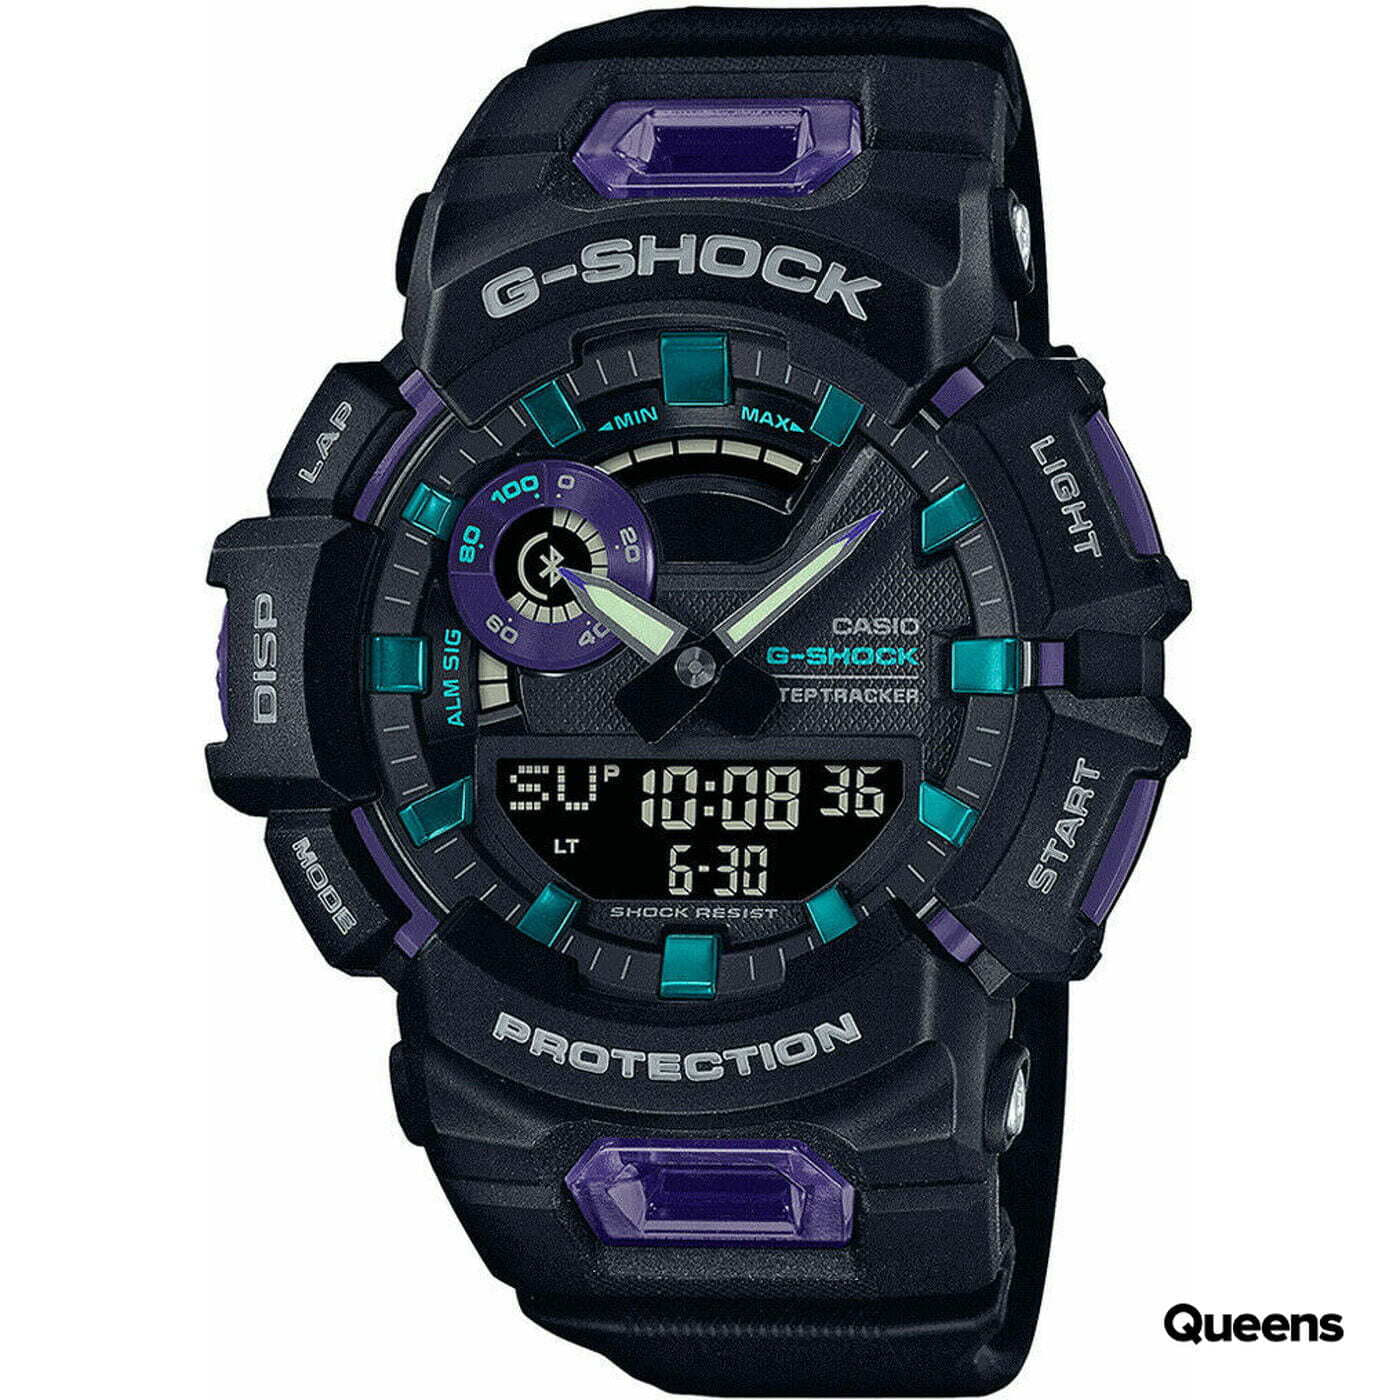 Watches Casio G-Shock G-Squad GBA 900-1A6ER Black